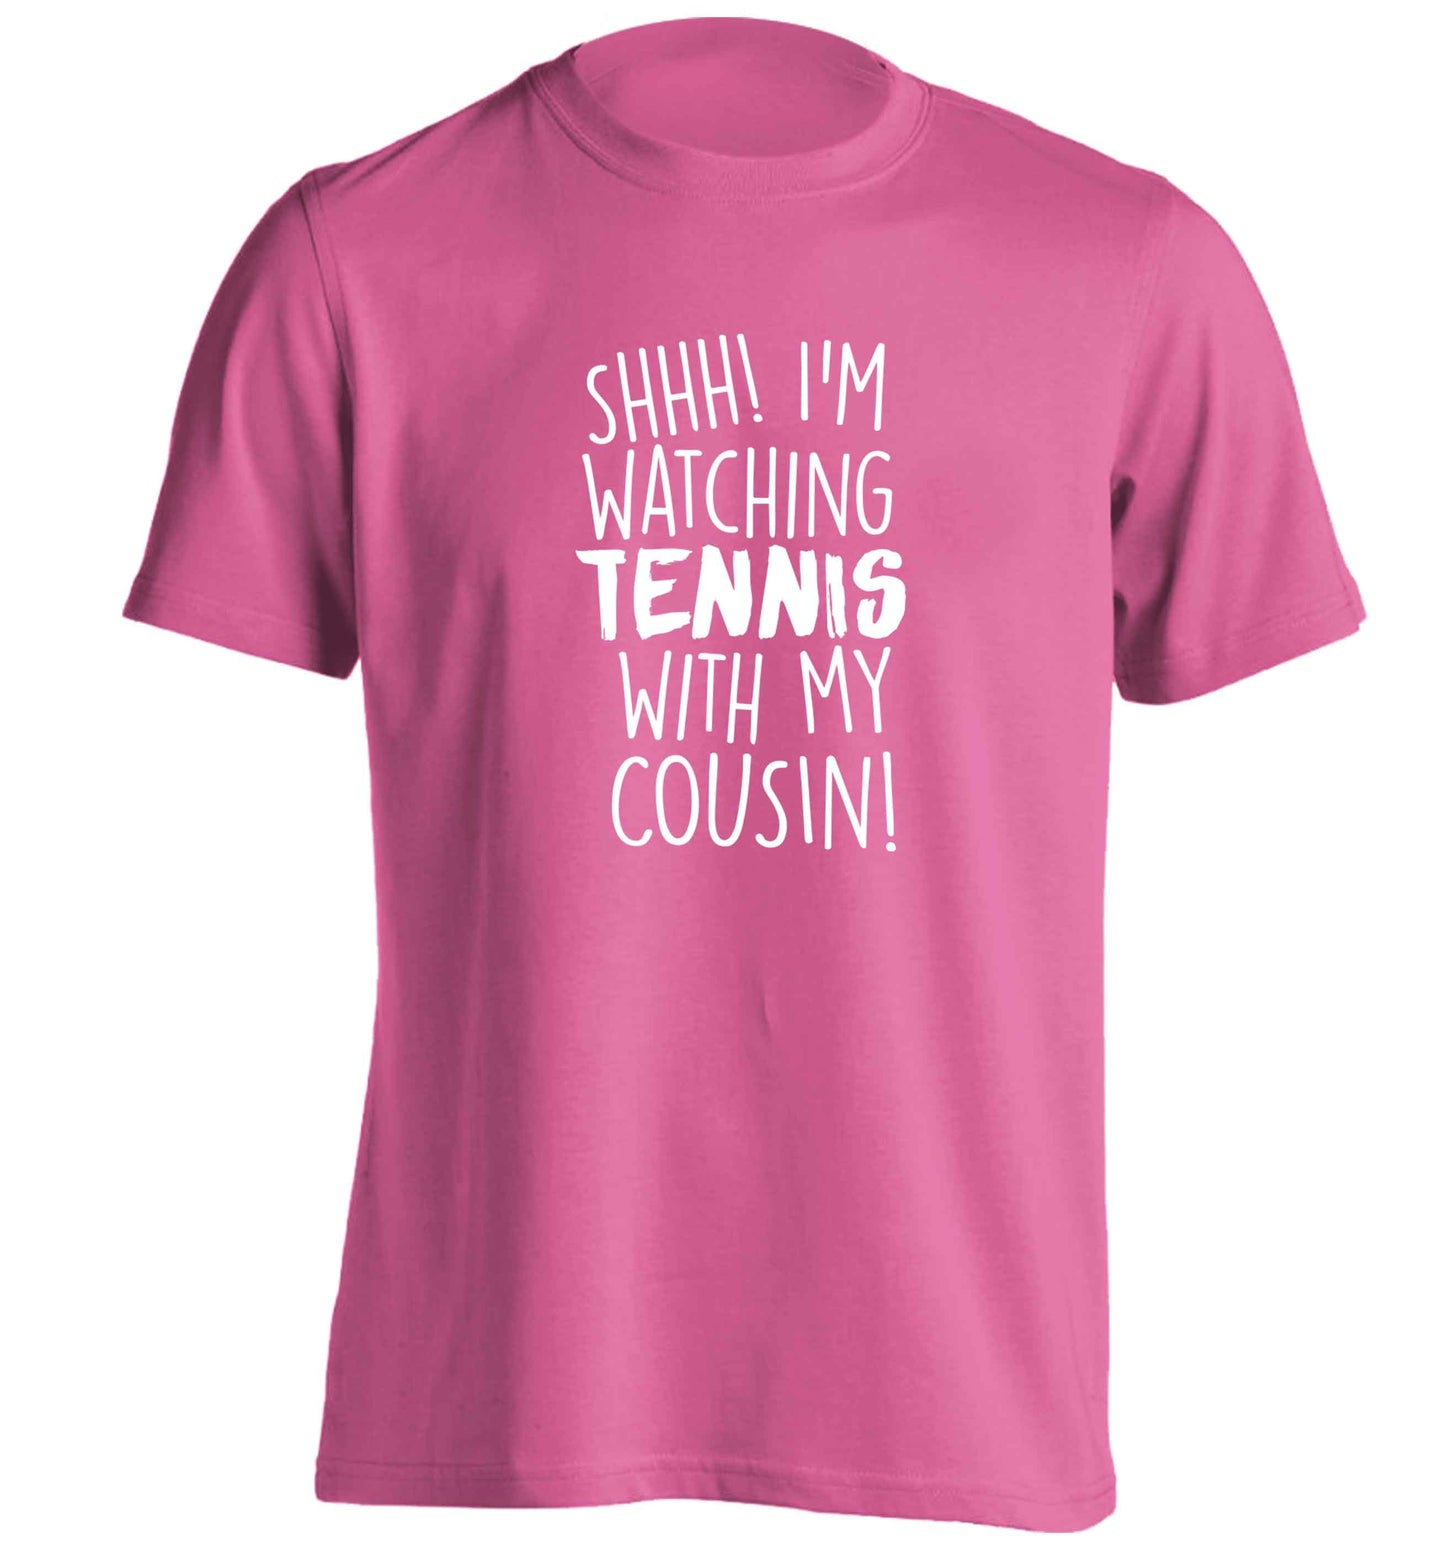 Shh! I'm watching tennis with my cousin! adults unisex pink Tshirt 2XL